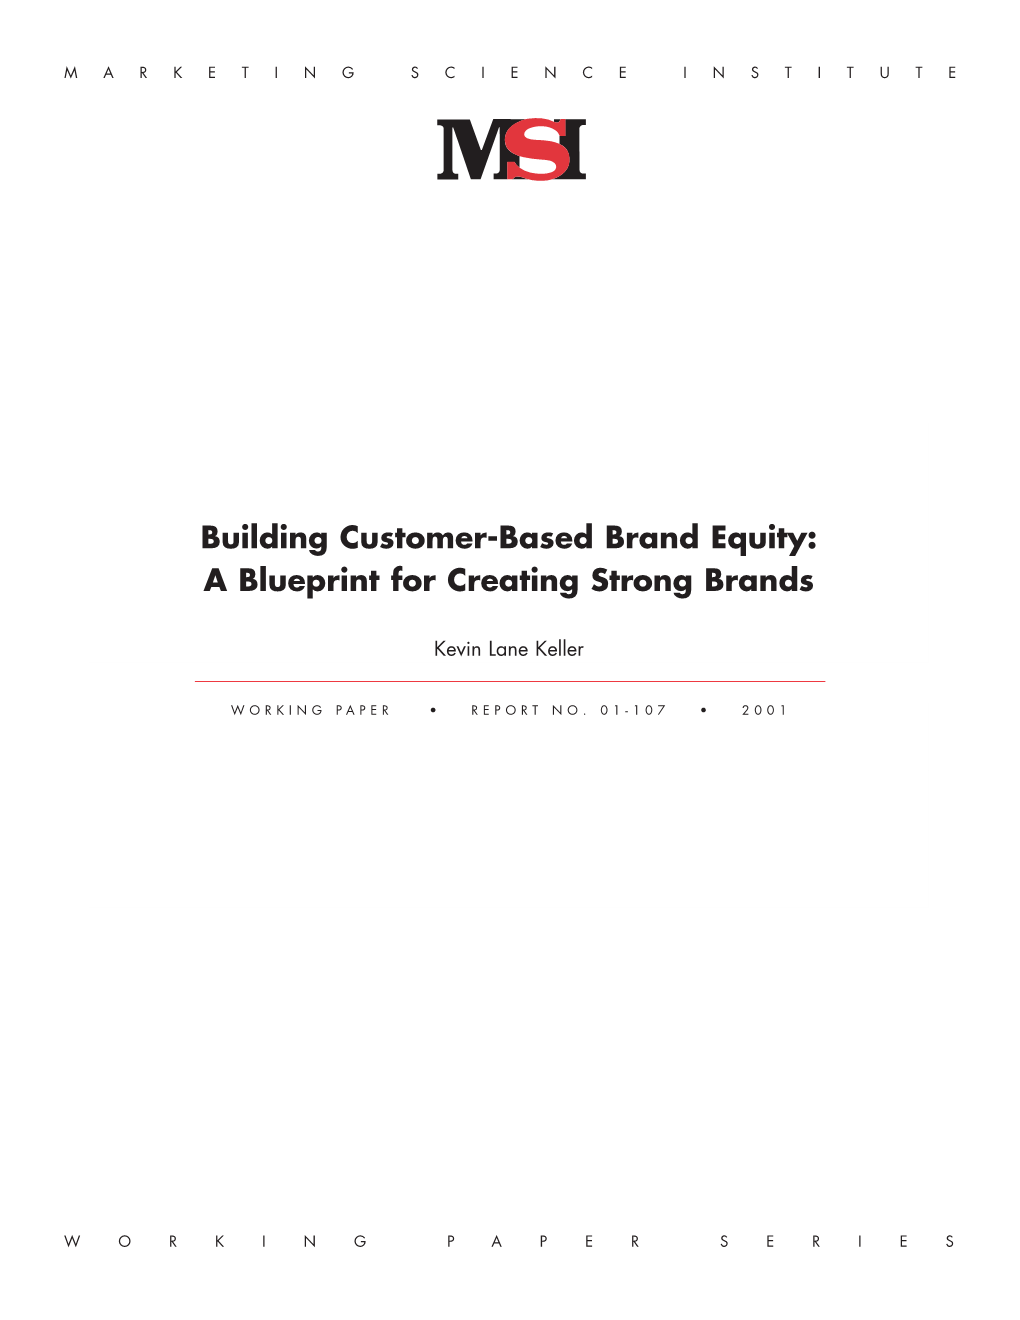 Building Customer-Based Brand Equity: a Blueprint for Creating Strong Brands